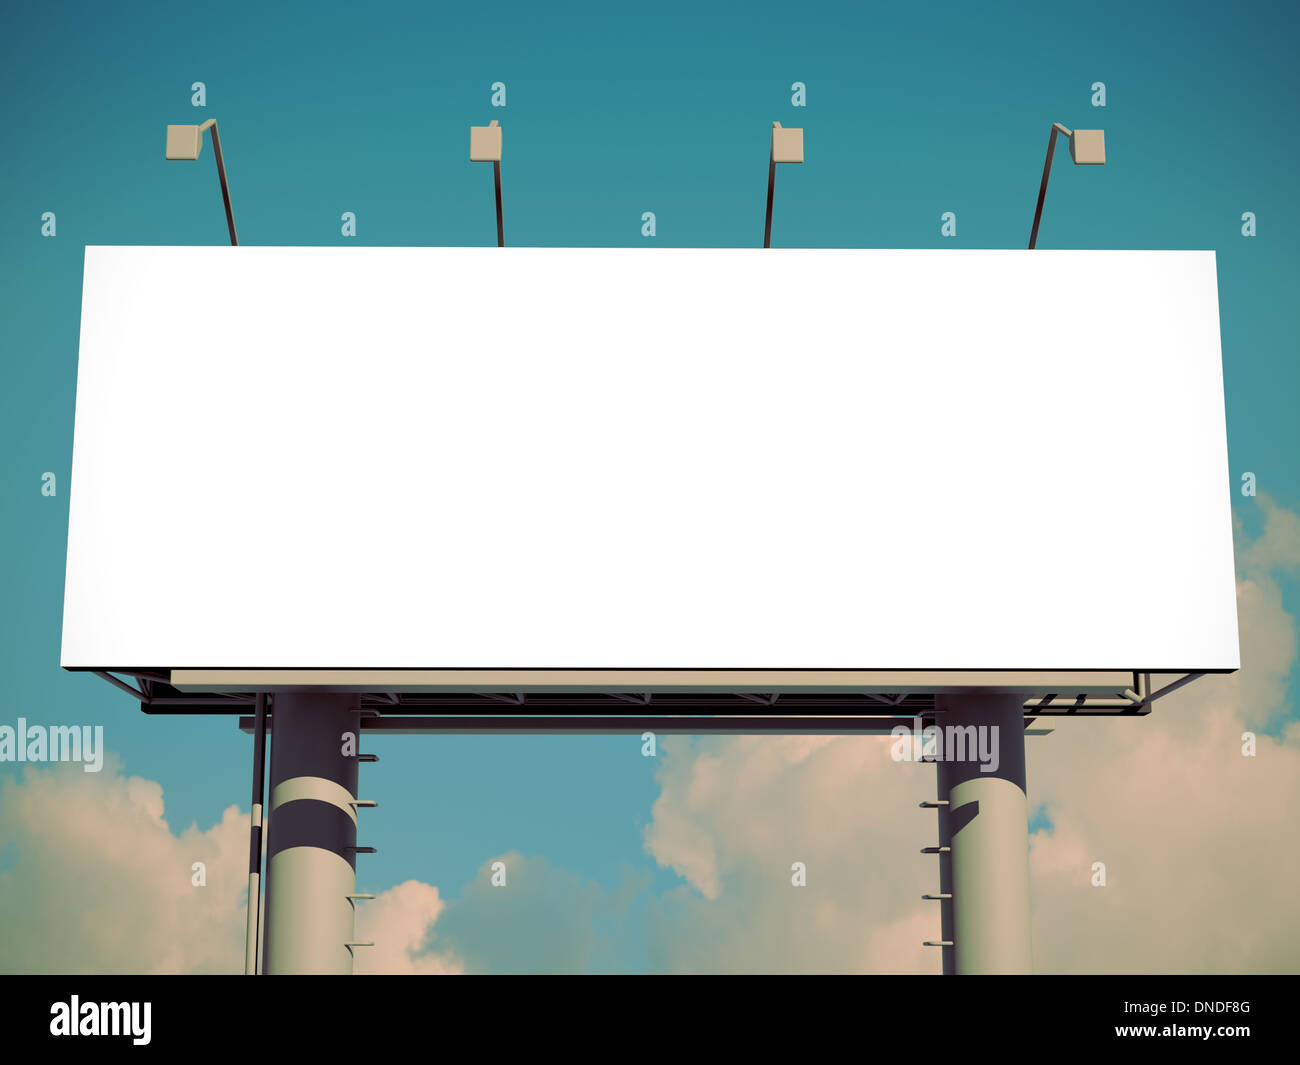 Billboard with empty screen, against blue sky with retro effect Stock Photo